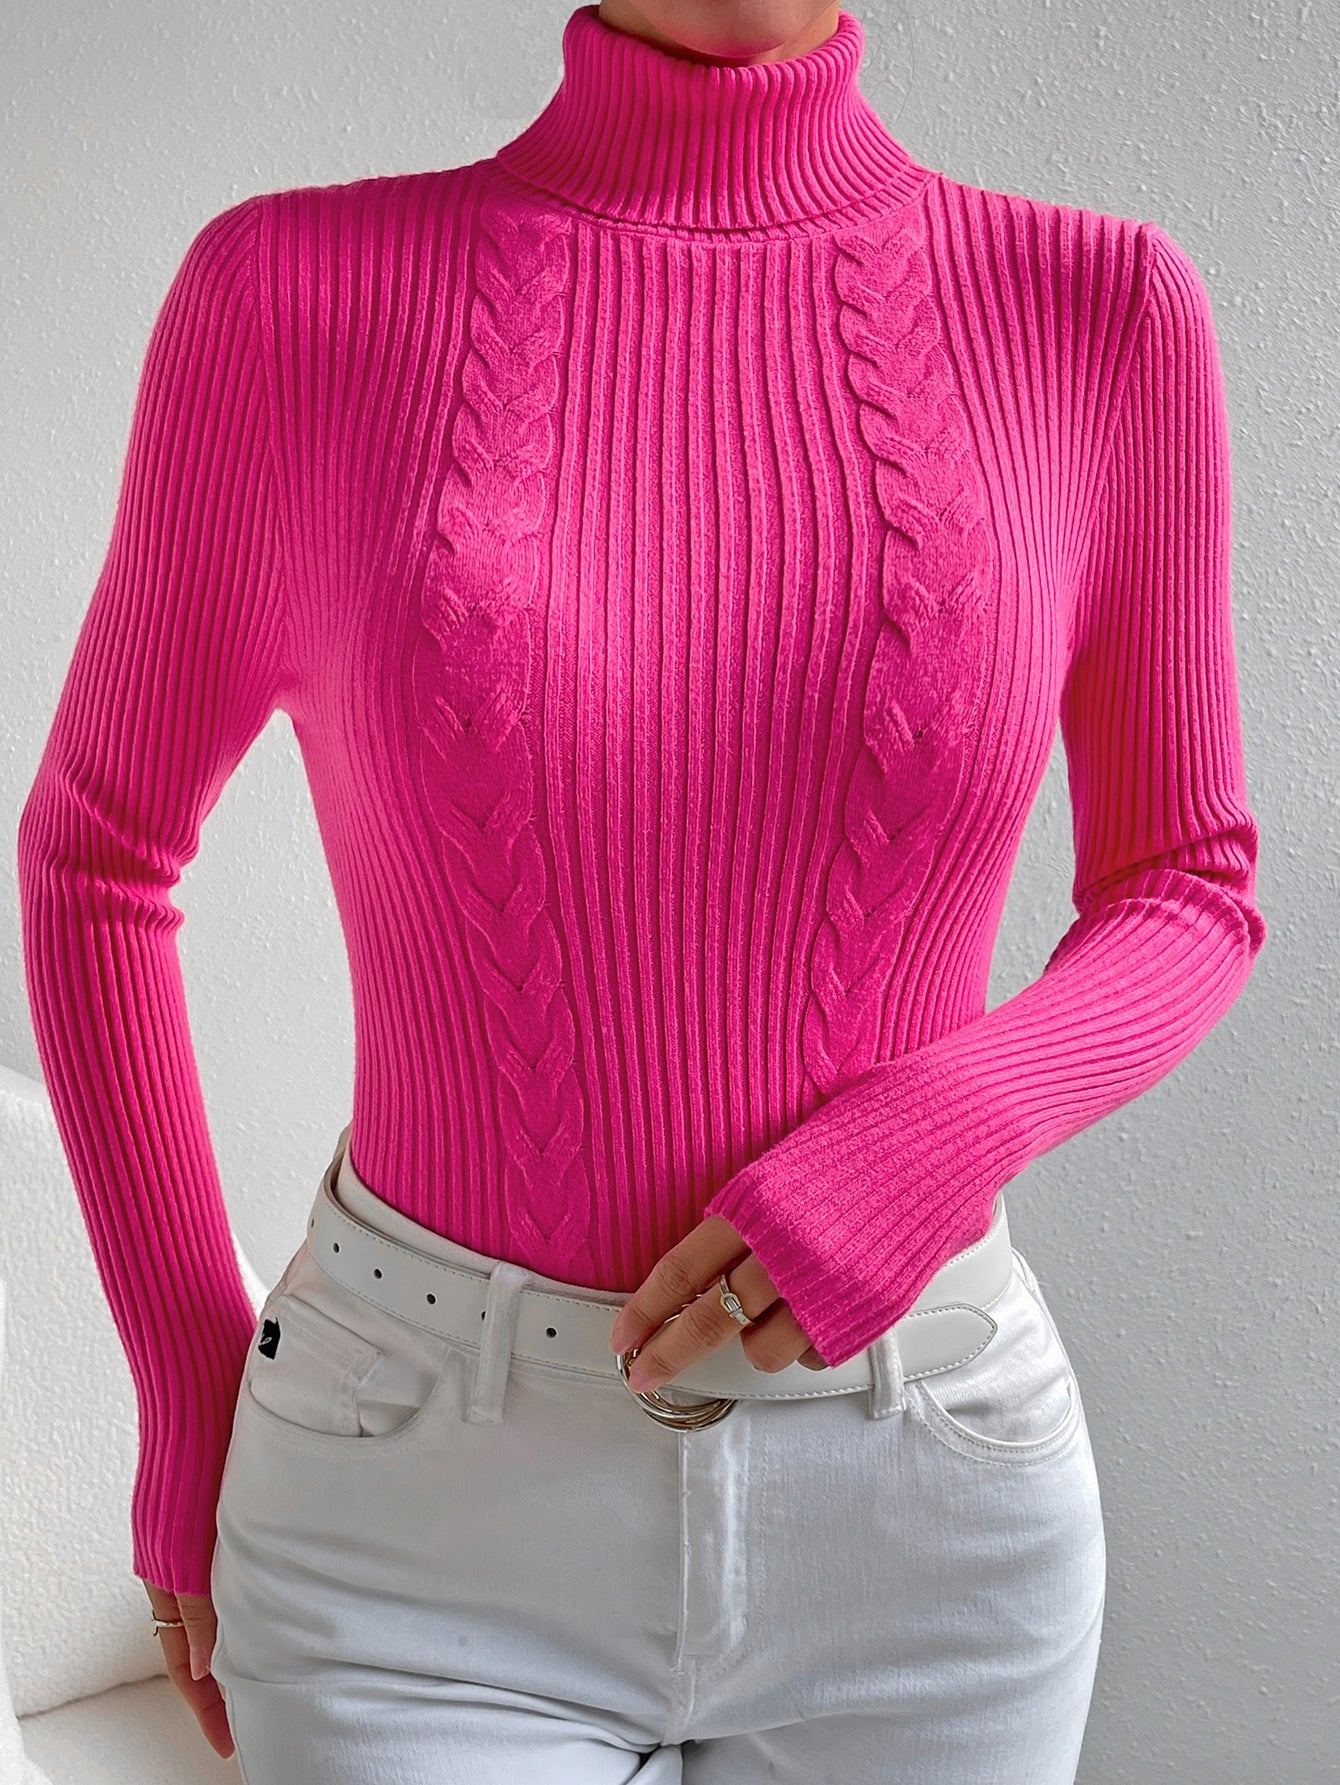 Hot pink Turtleneck Cable Knit Sweater